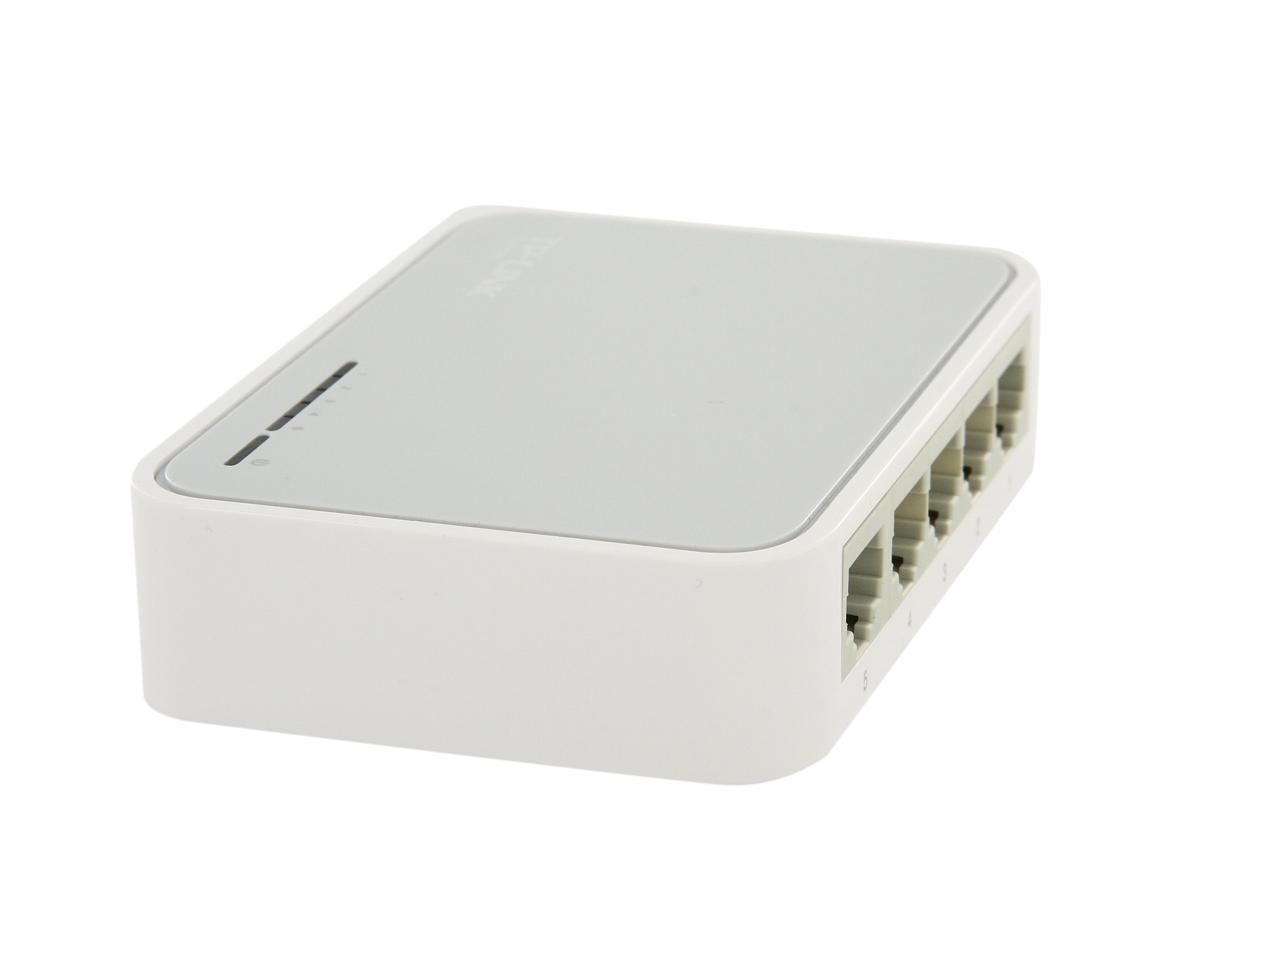 use my tl-wn725n for an access point on mac